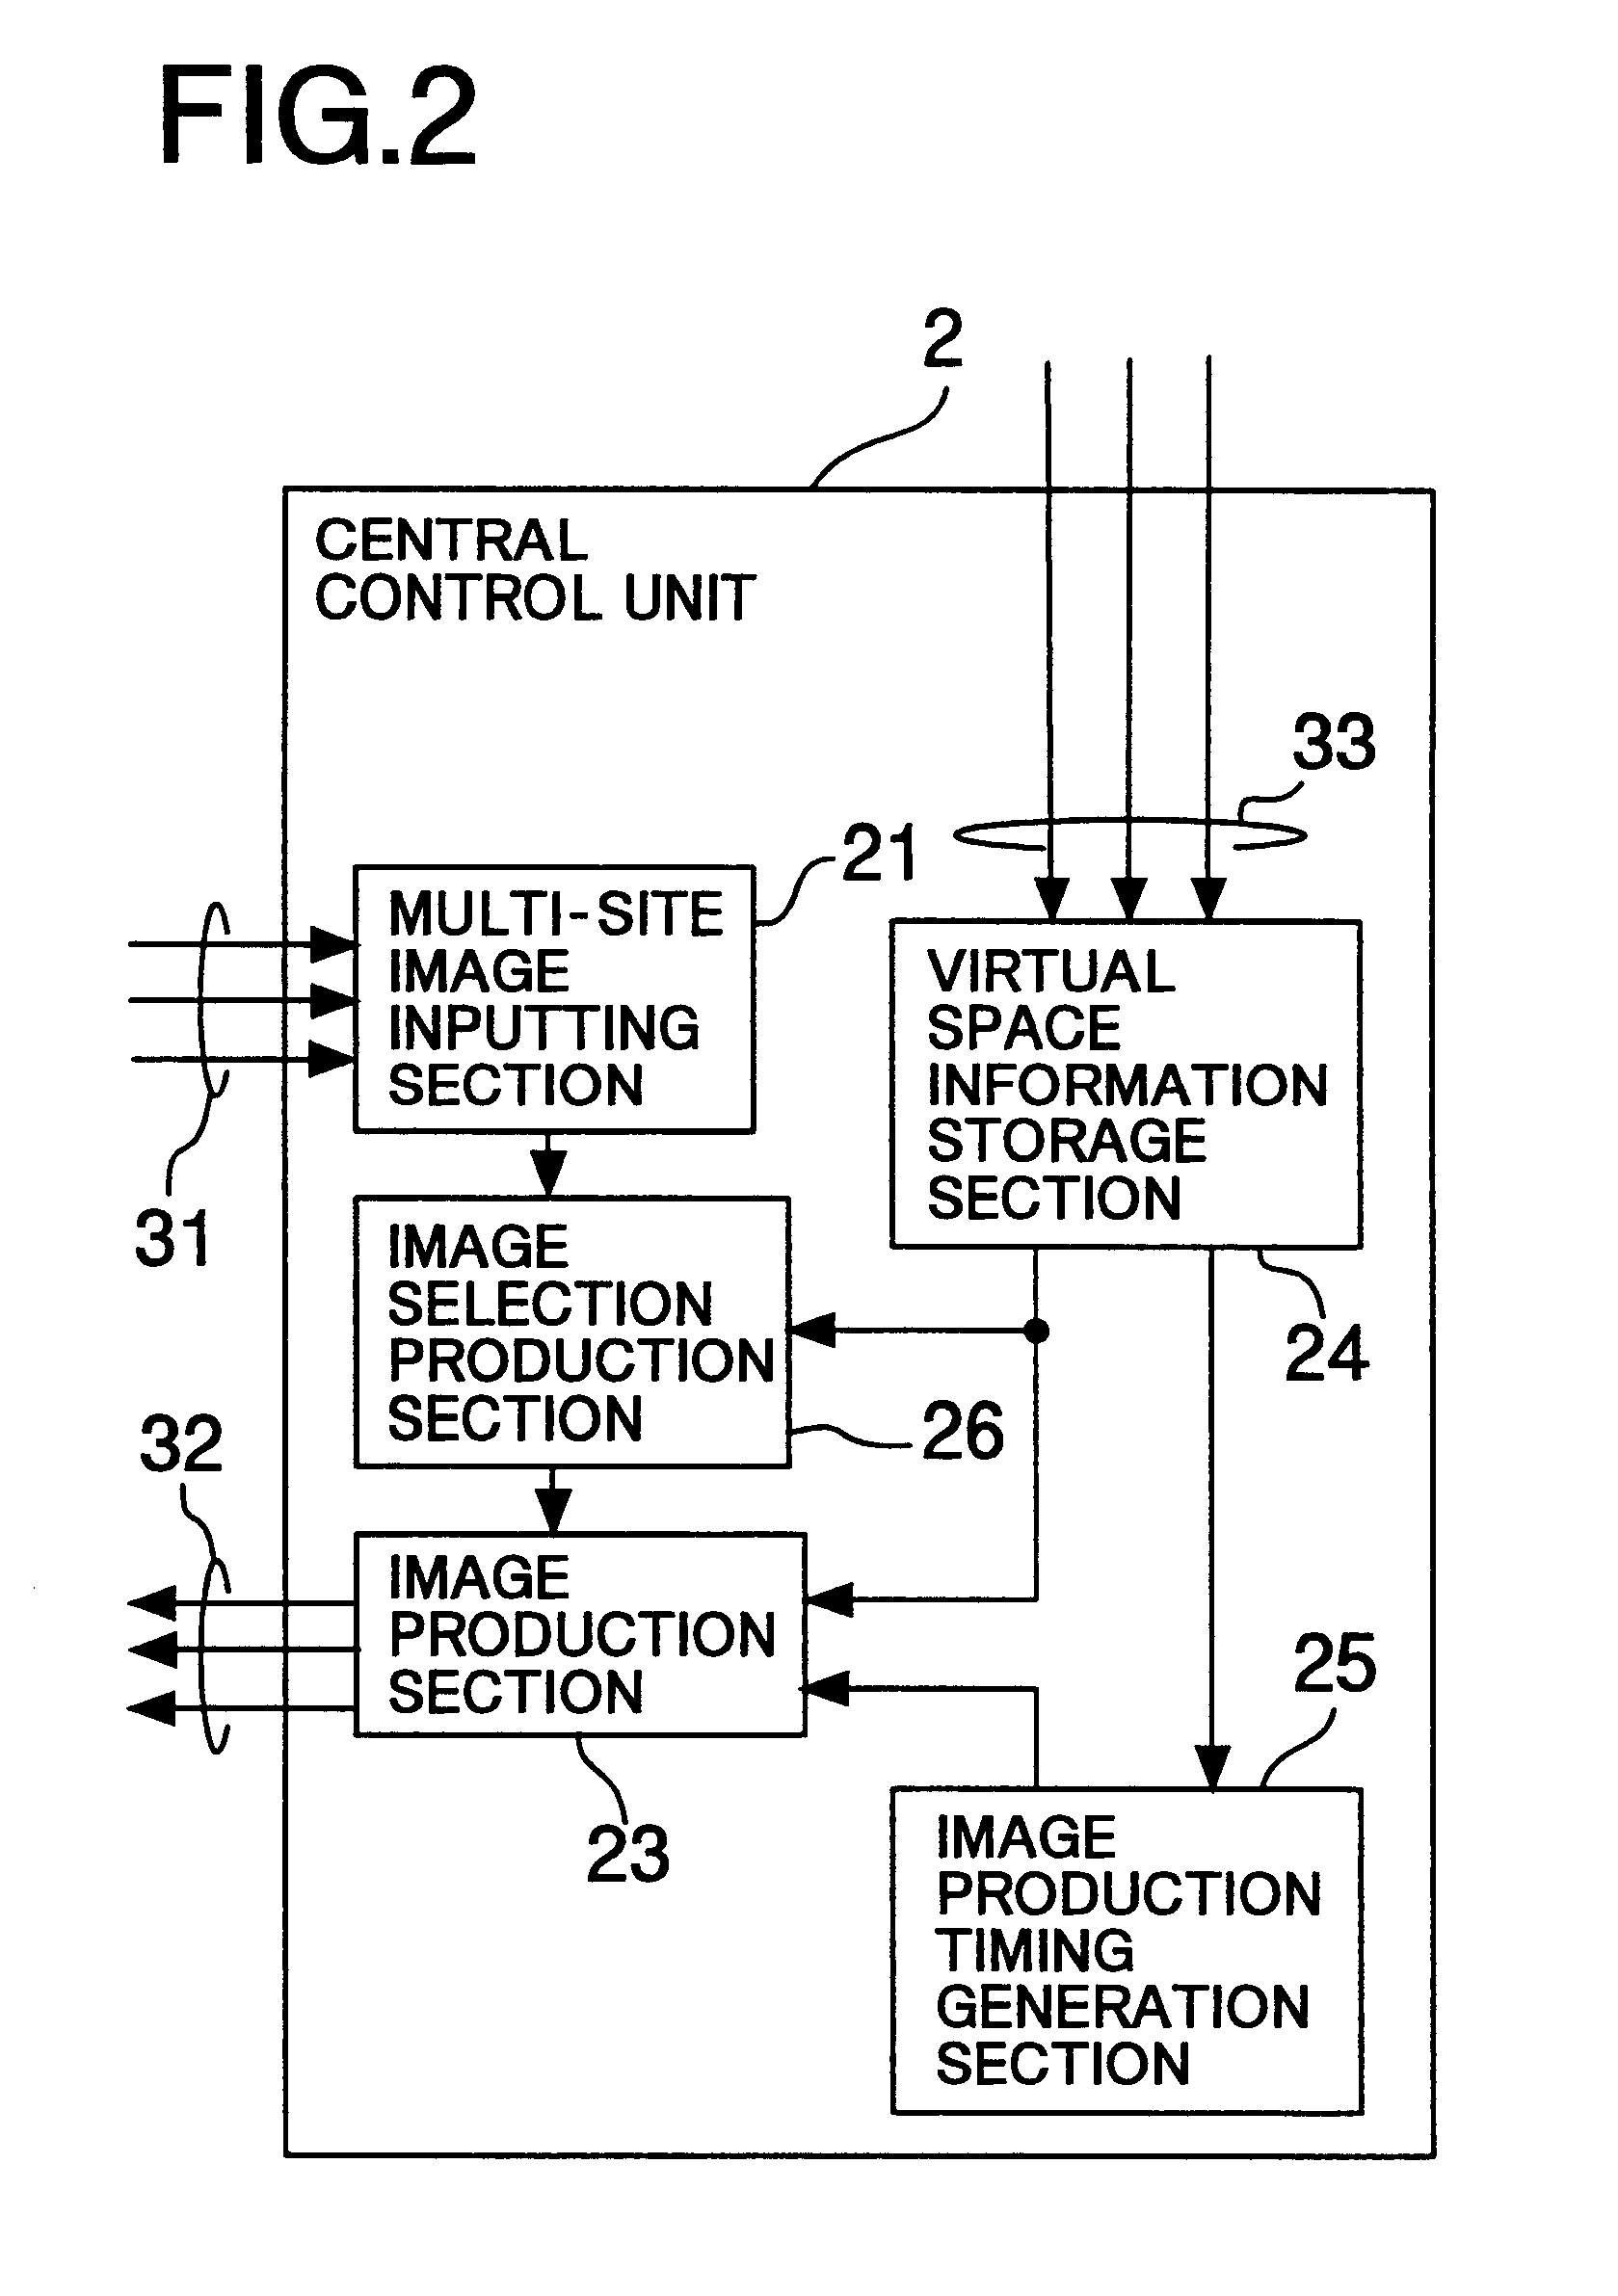 Multi-site television conference system and central control apparatus and conference terminal for use with the system